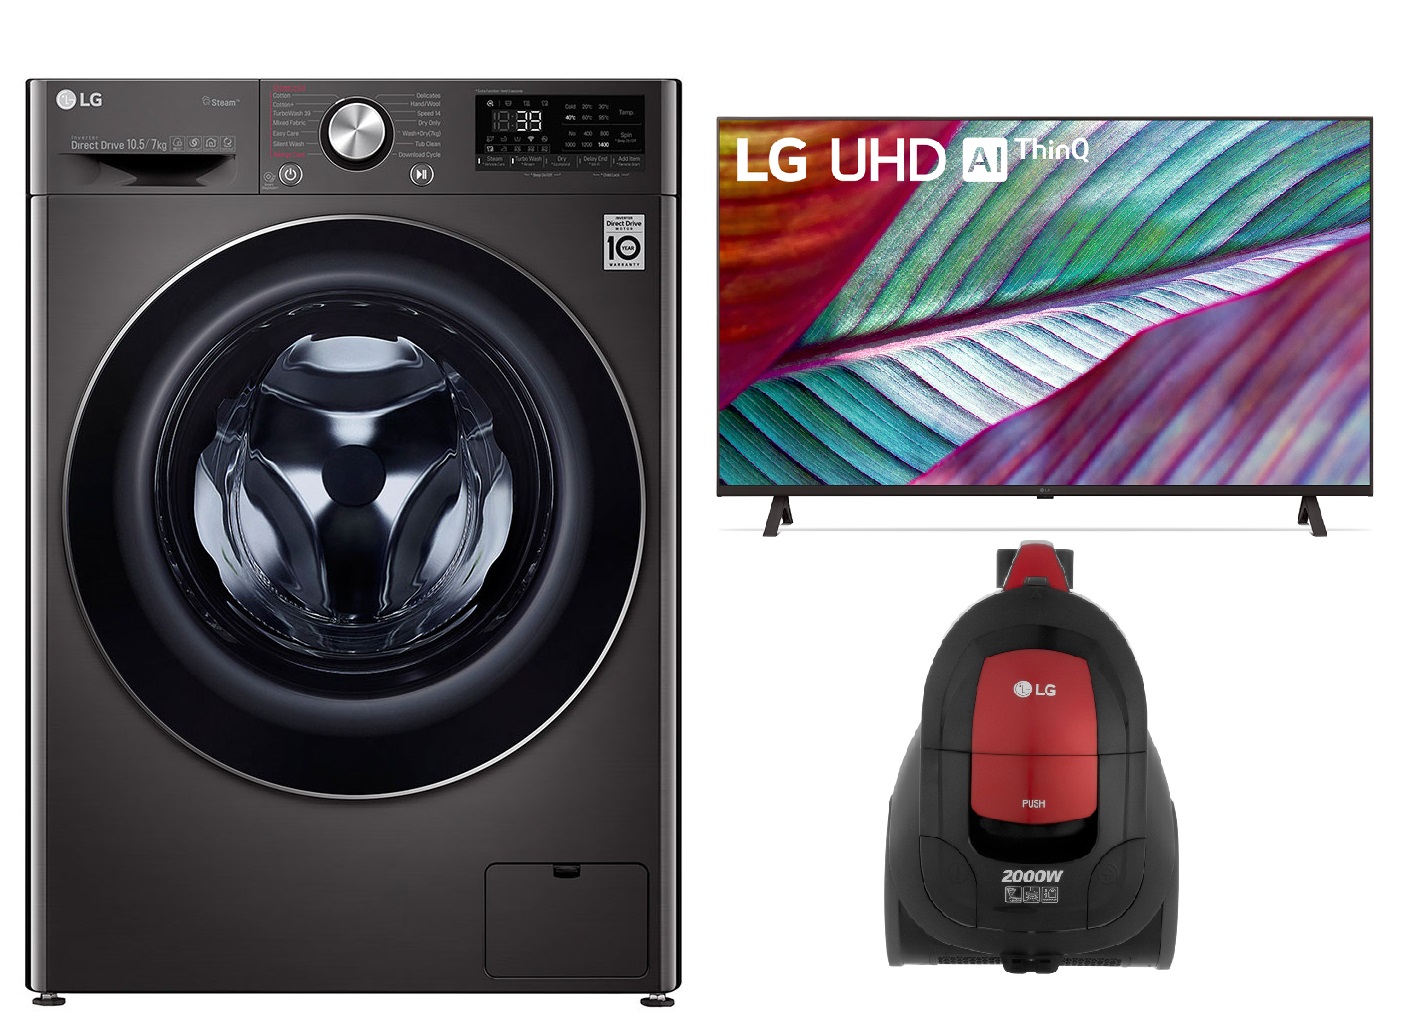 LG Front Load Washing Machine with Dryer, 10.5 KG, Black - F4V9RCP2E with 43 Inch UHD Smart LED TV, Black - 43UR78006LL and Bagless Vacuum Cleaner, 2000 Watt - VC5420NNTR